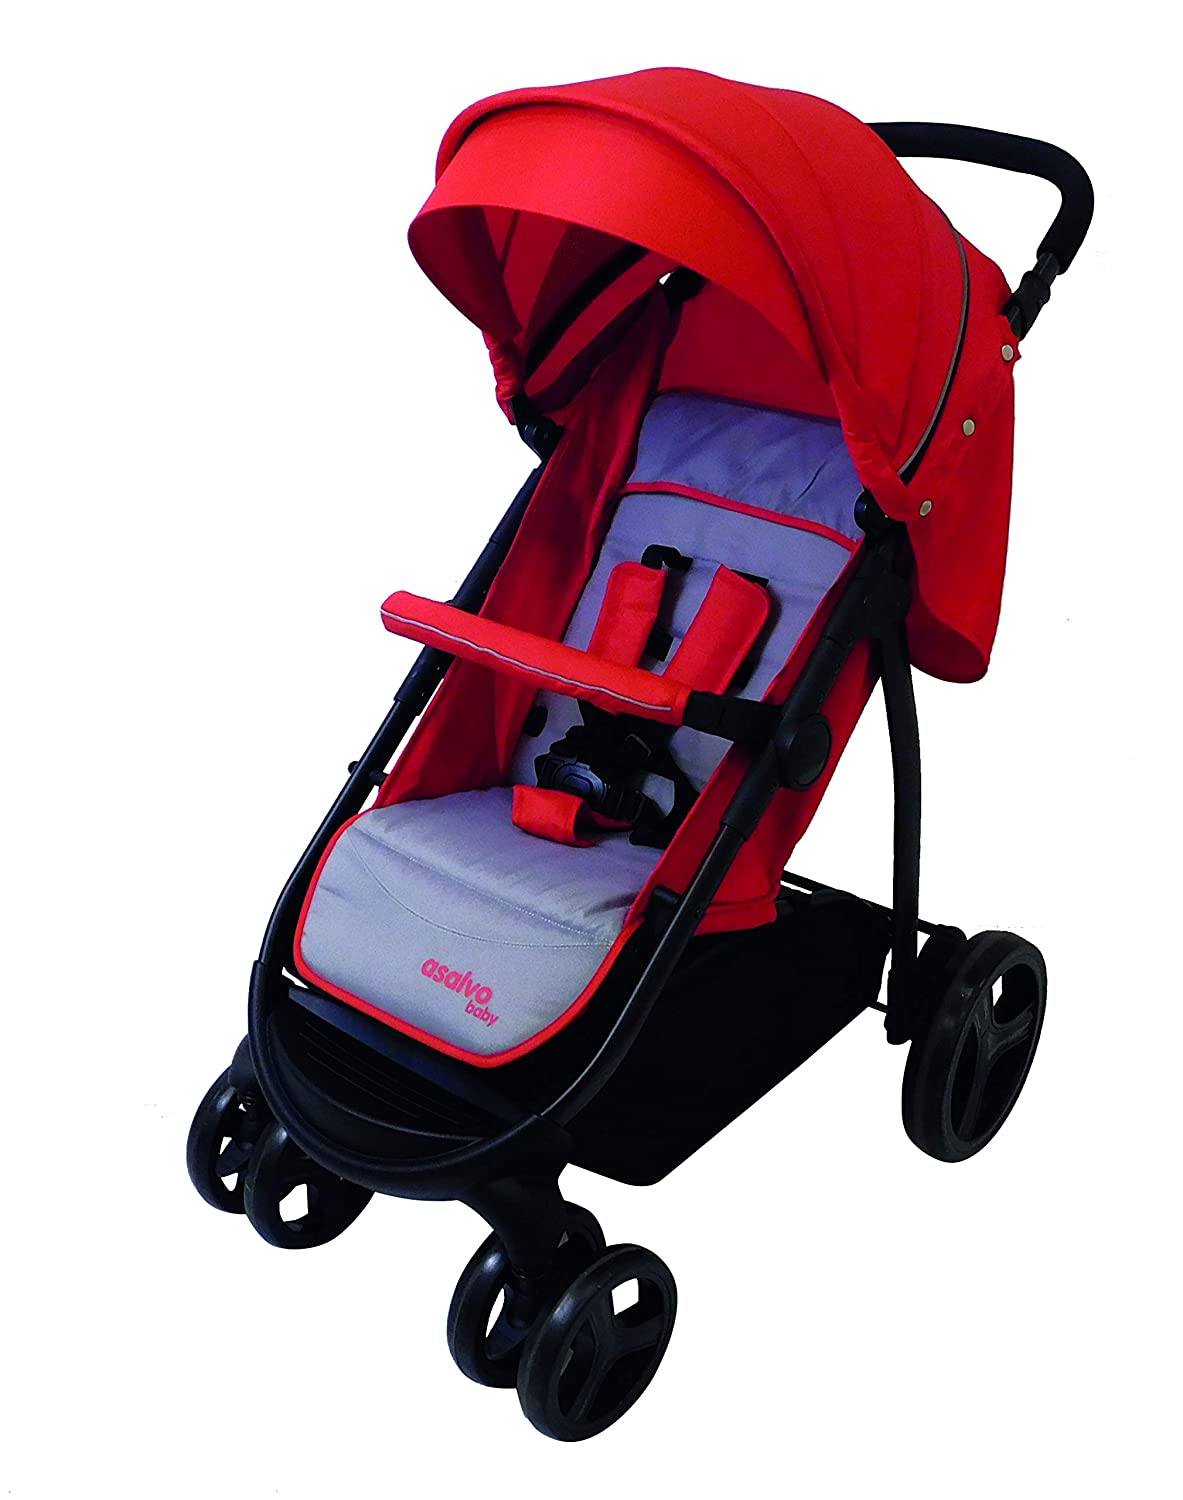 Asalvo Lider Buggy Red